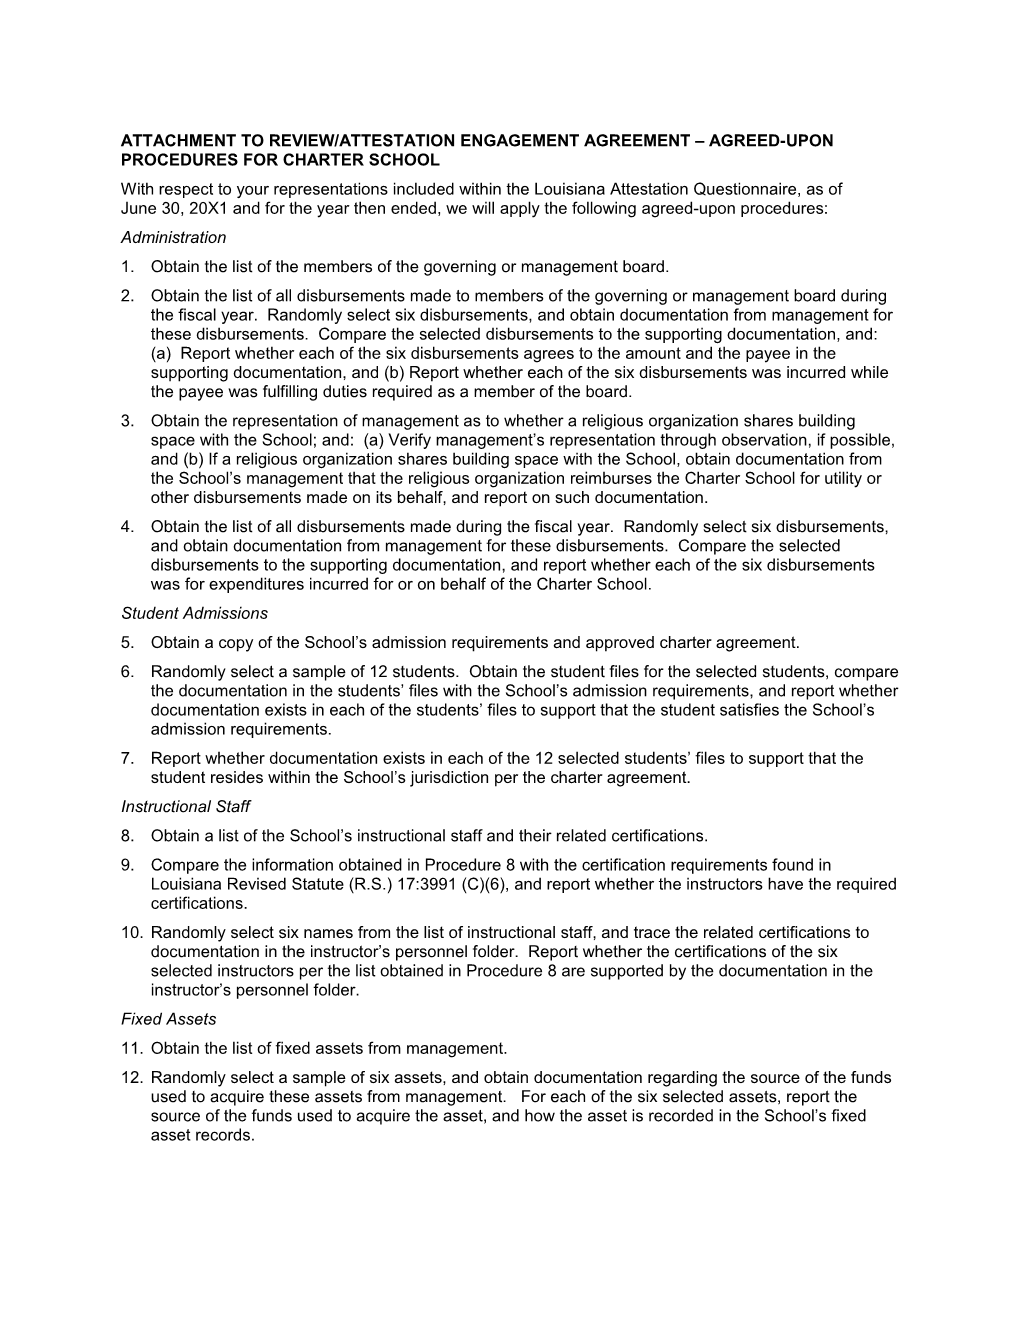 Attachment to Review/Attestation Engagement Agreement Agreed-Upon Procedures for Charter